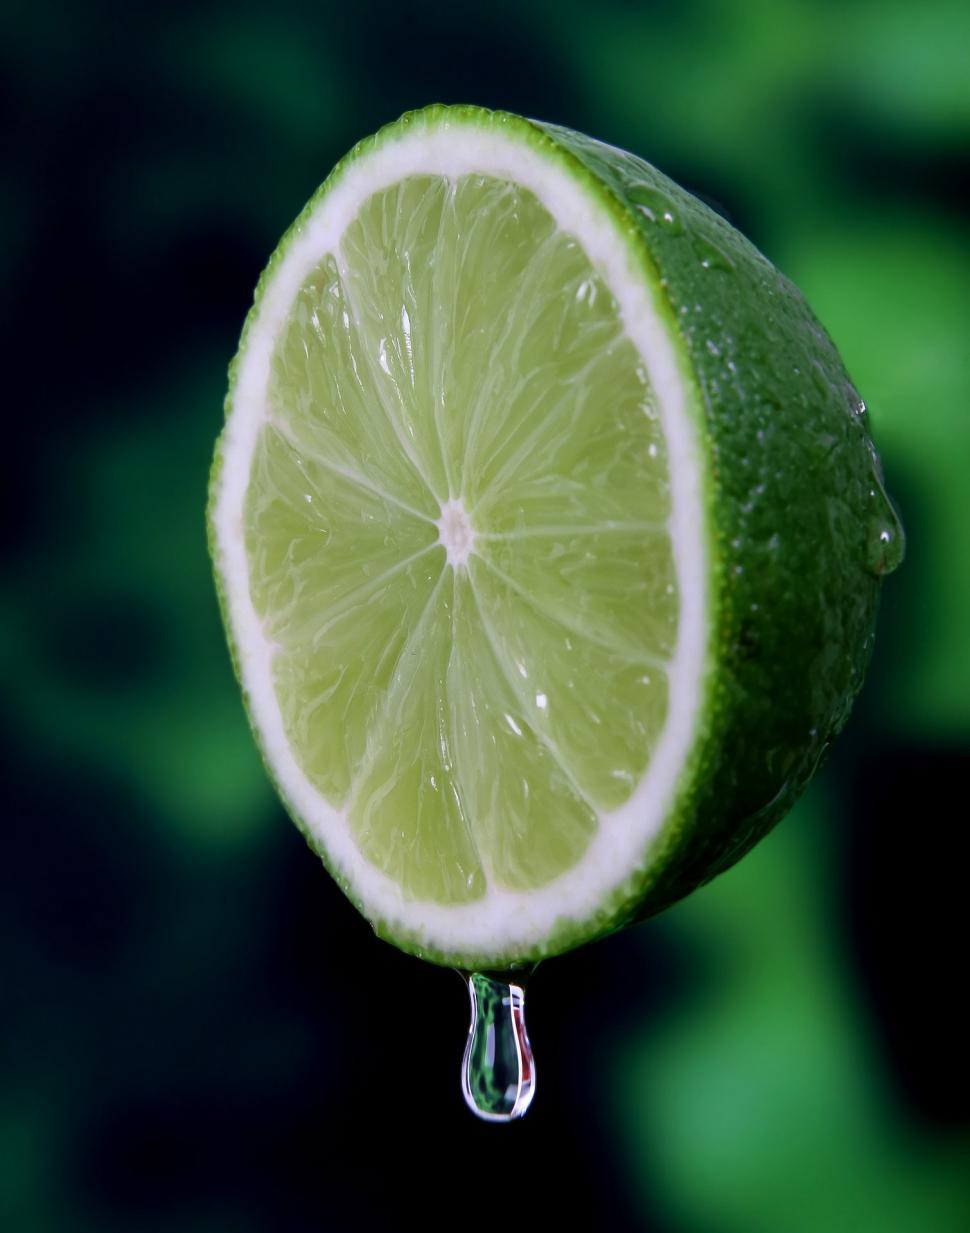 Free Image of Fresh Lime With Water Droplet 